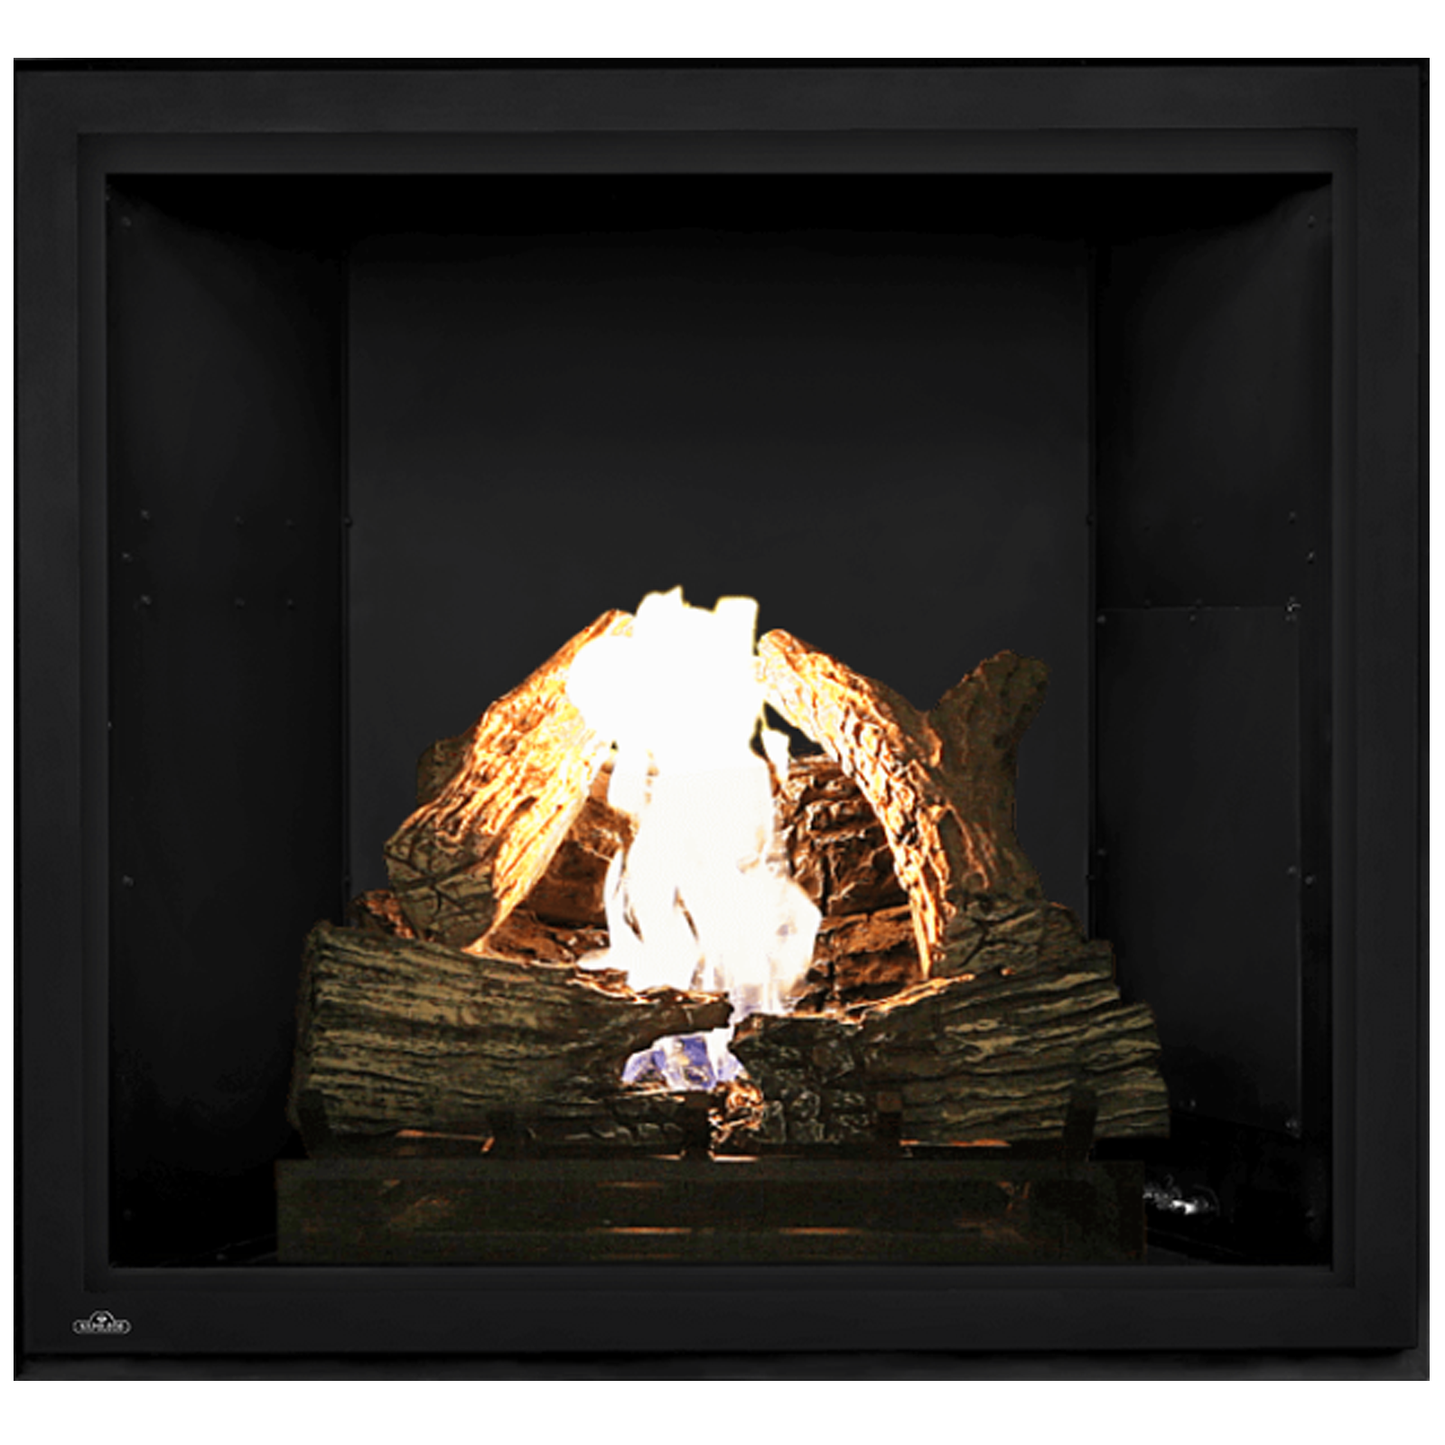 Napoleon Starfire 52 Deluxe Top Vent Gas Fireplace | HDX52NT-2